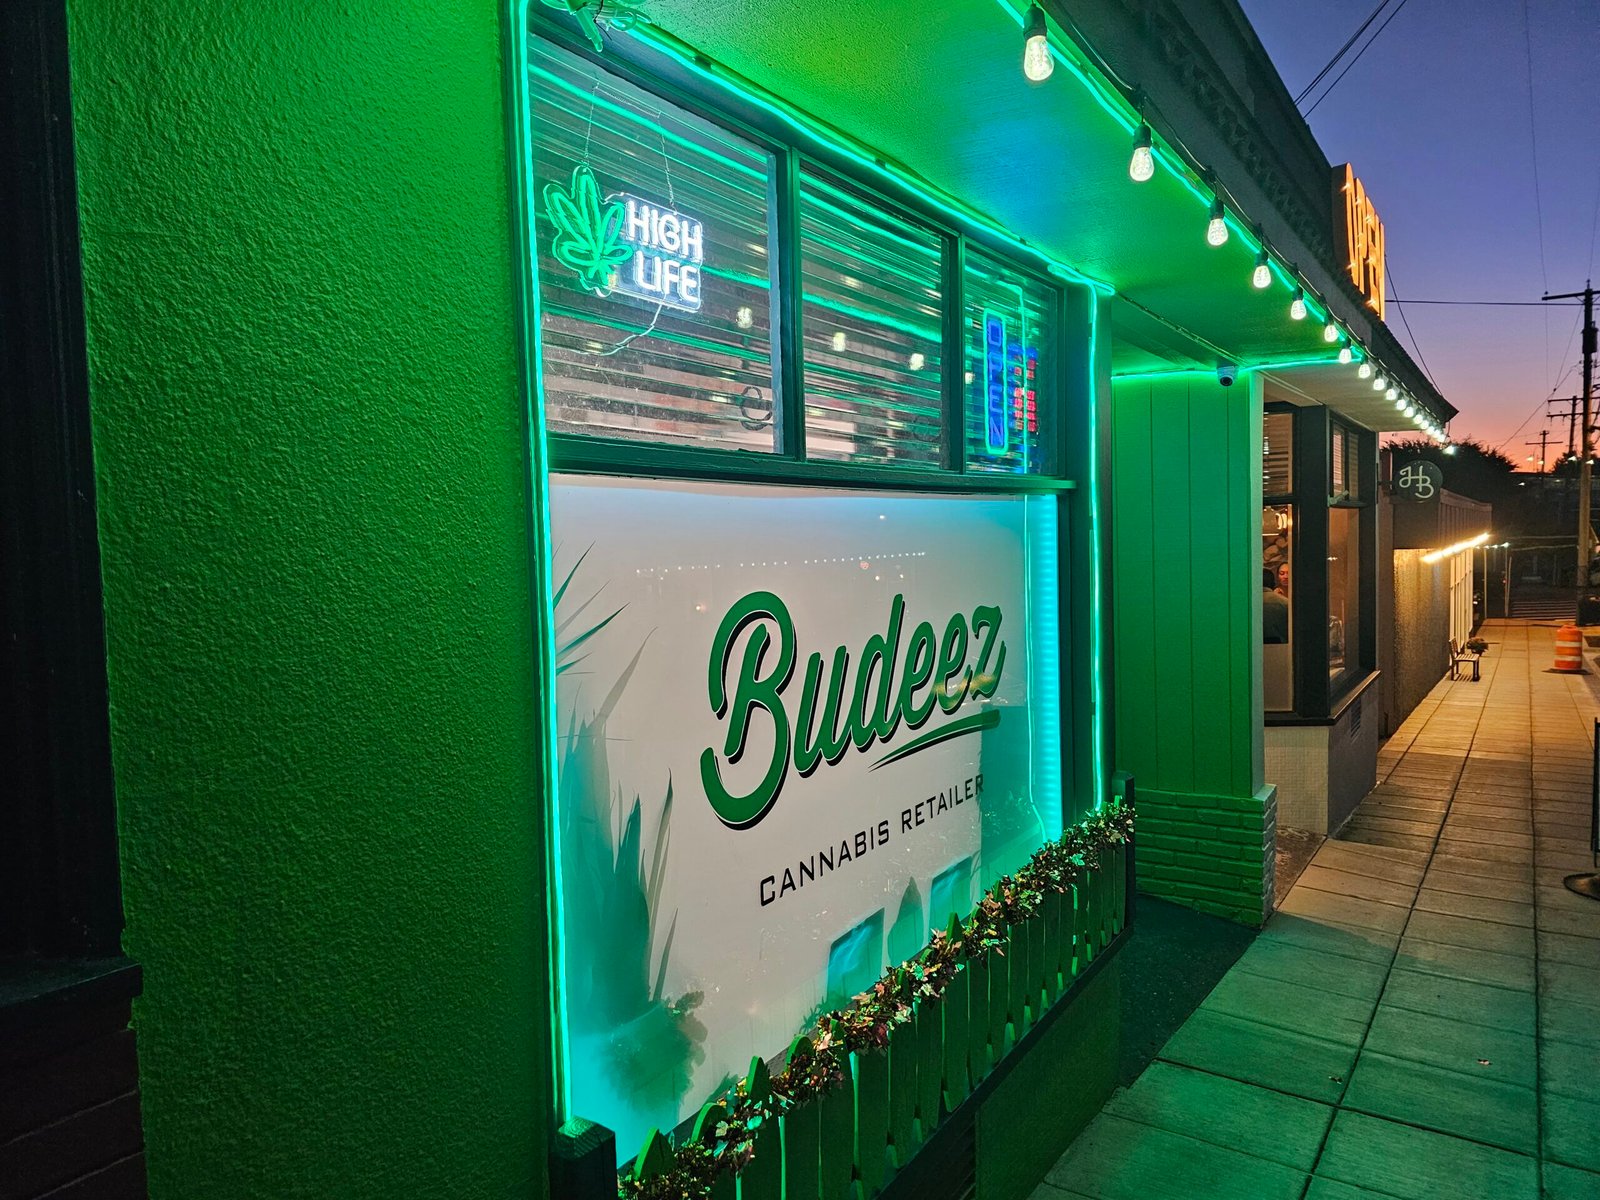 New 2023 Budeez Storefront Pic Night Shot Manette Bridge Downtown Neighborhood Manette Saloon Hound and Bottle Paul's Flowers Khai Soi Boat Shed